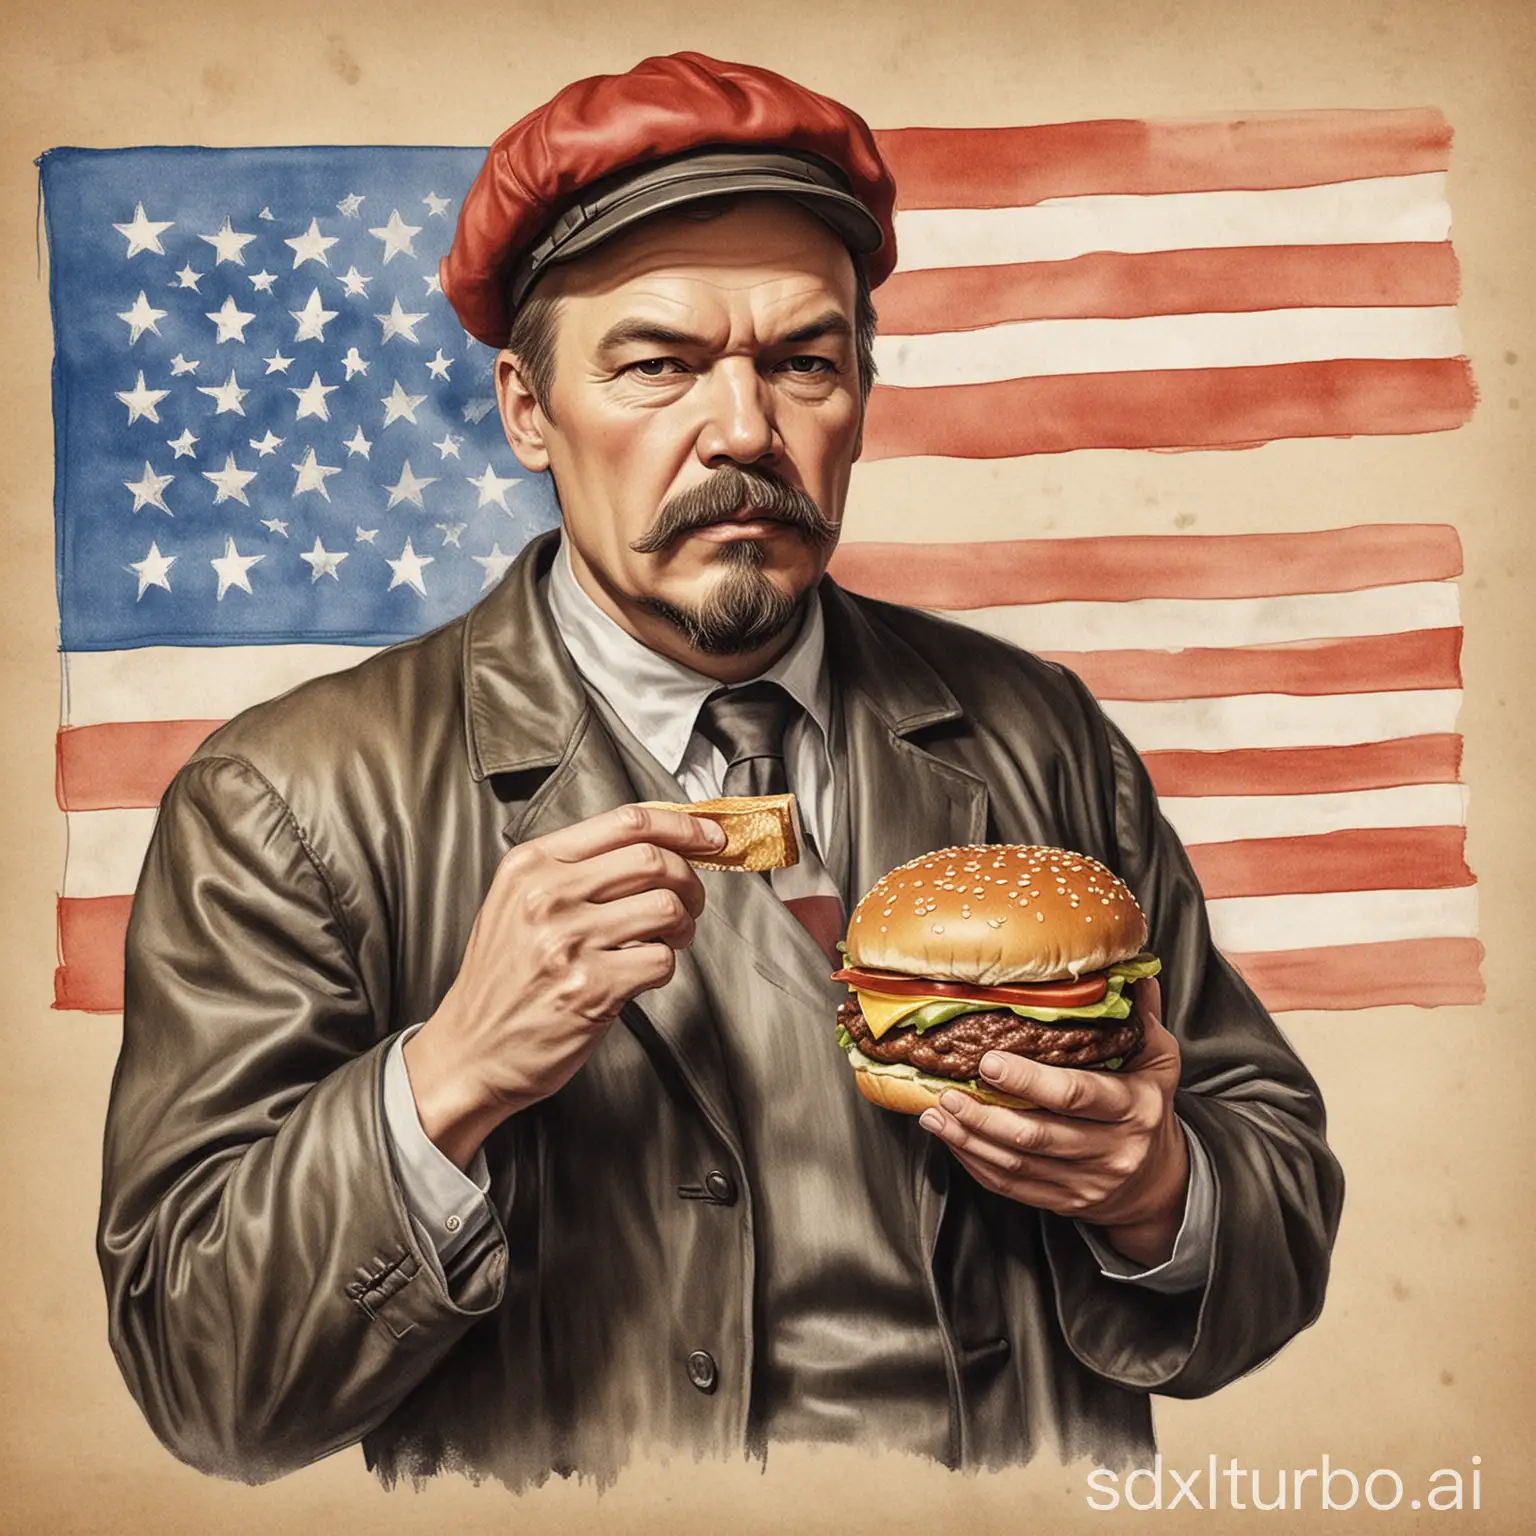 Draw a Lenin wearing a T-shirt with the American flag, wearing a capitalist hat, eating a hamburger.